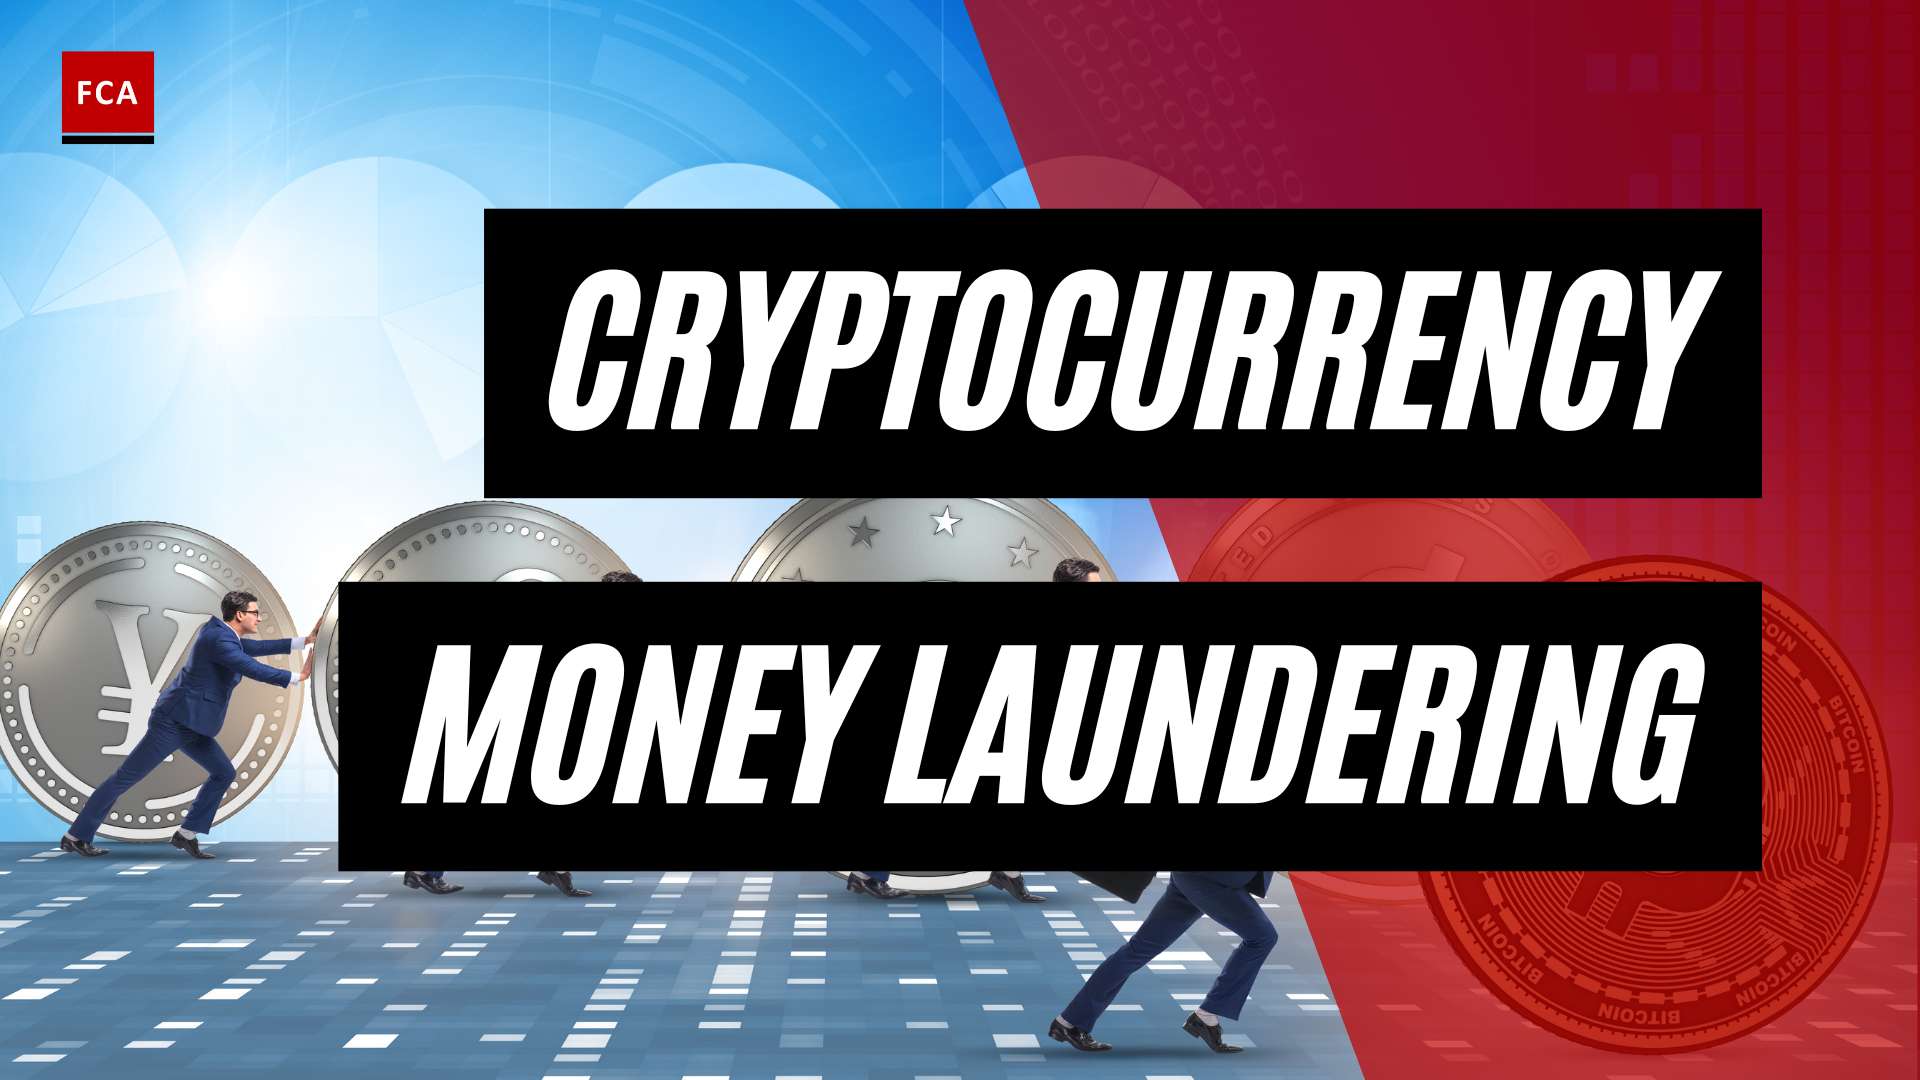 Digital Disguise: How Cryptocurrency Facilitates Money Laundering